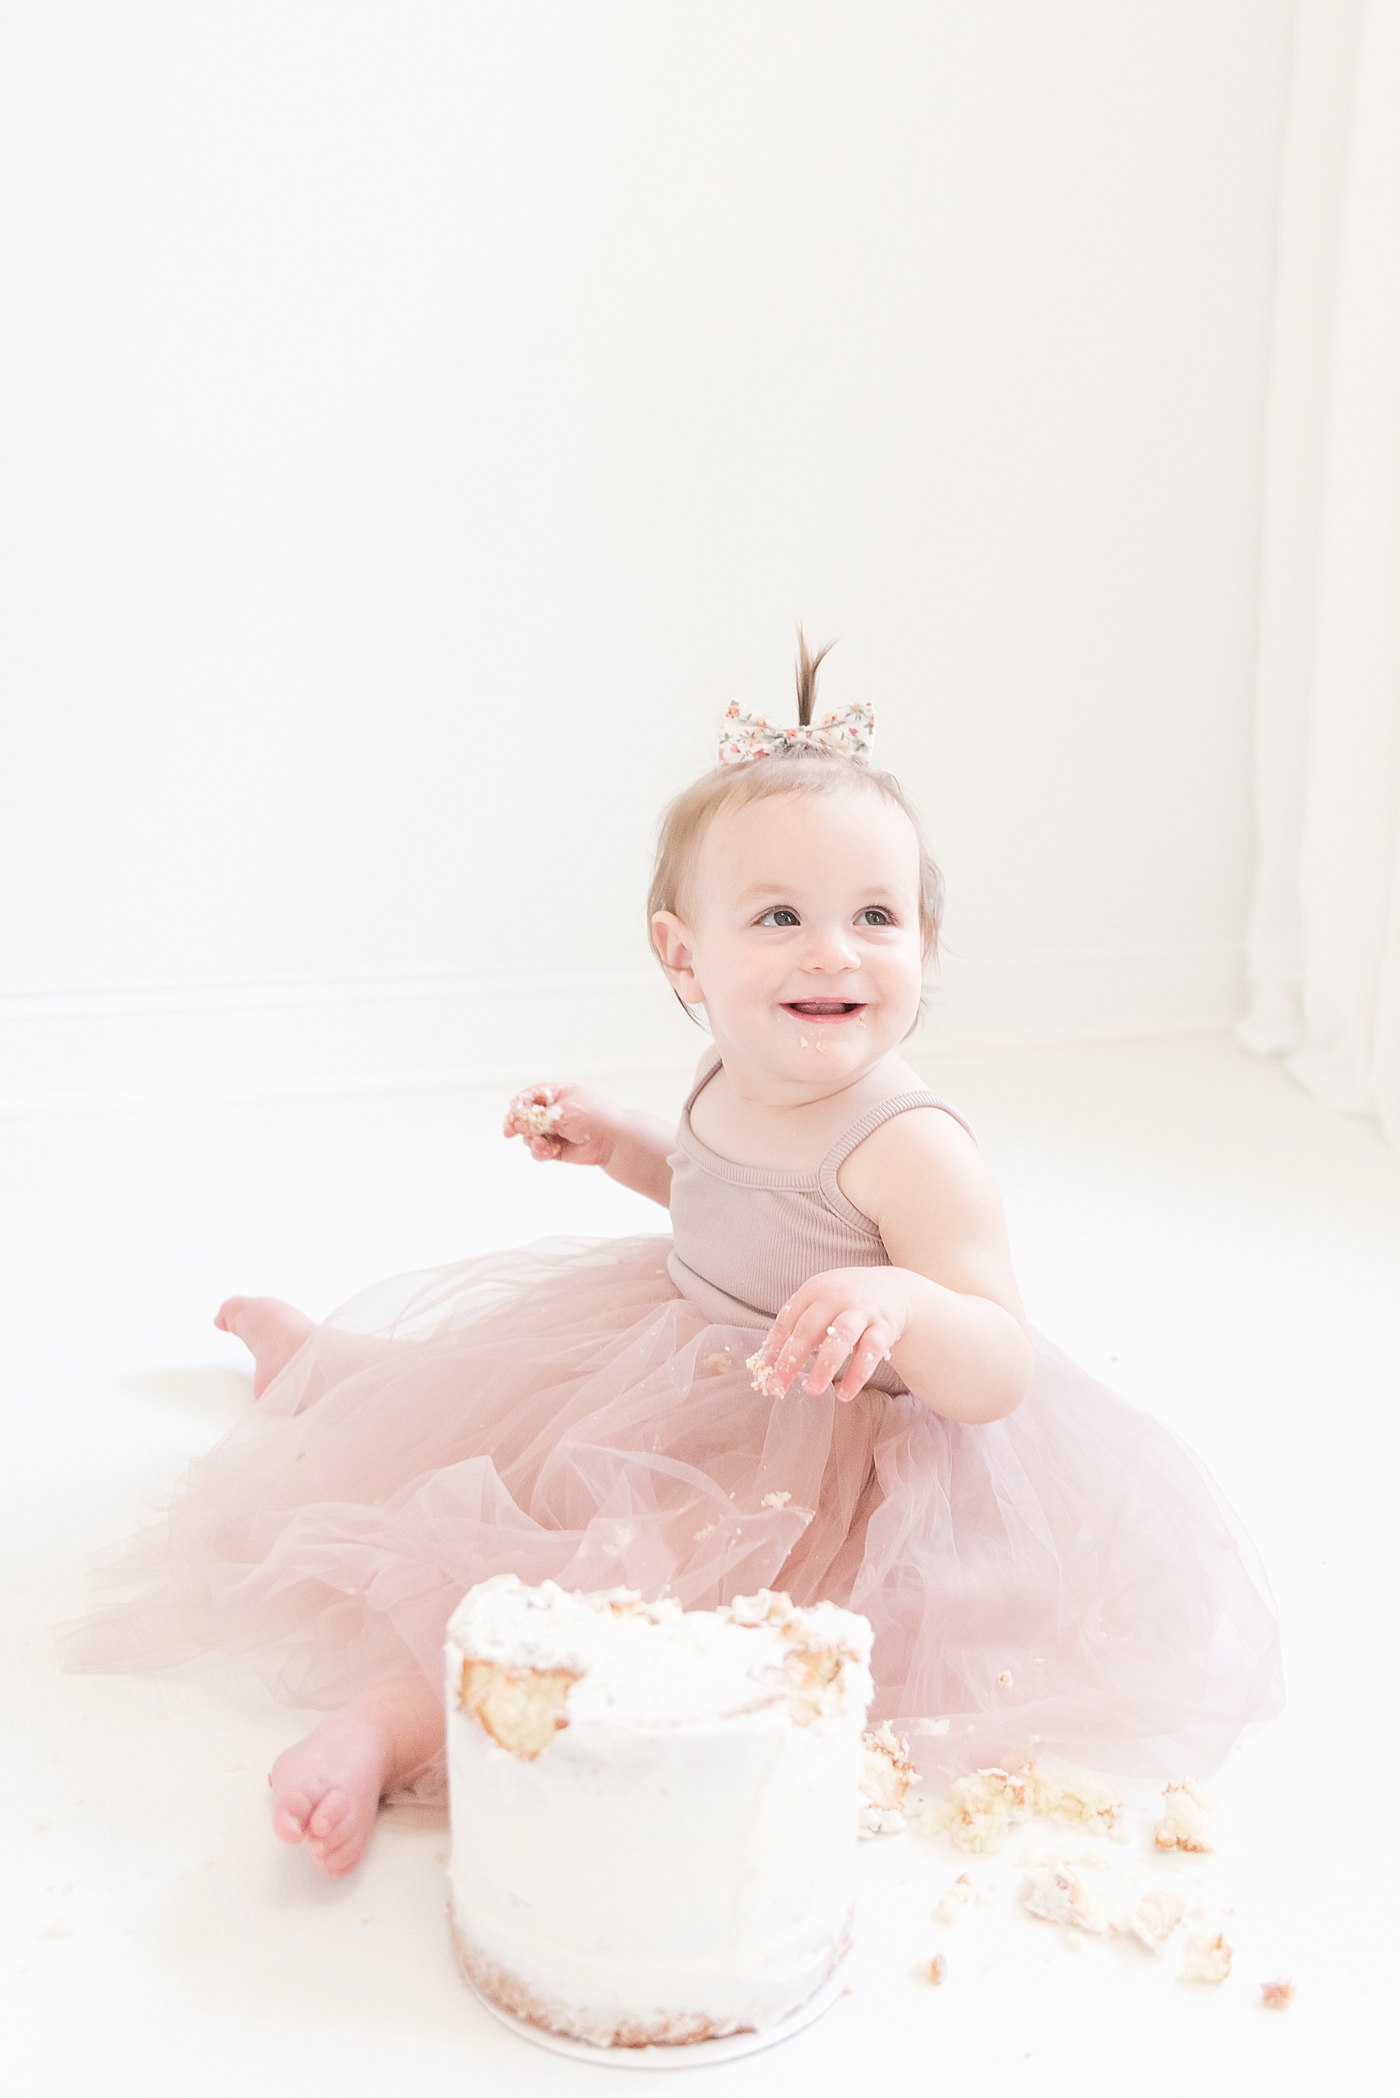 Baby girl in pink smiling while eating cake | Photo by Huntersville Baby Photographer Anna Wisjo 